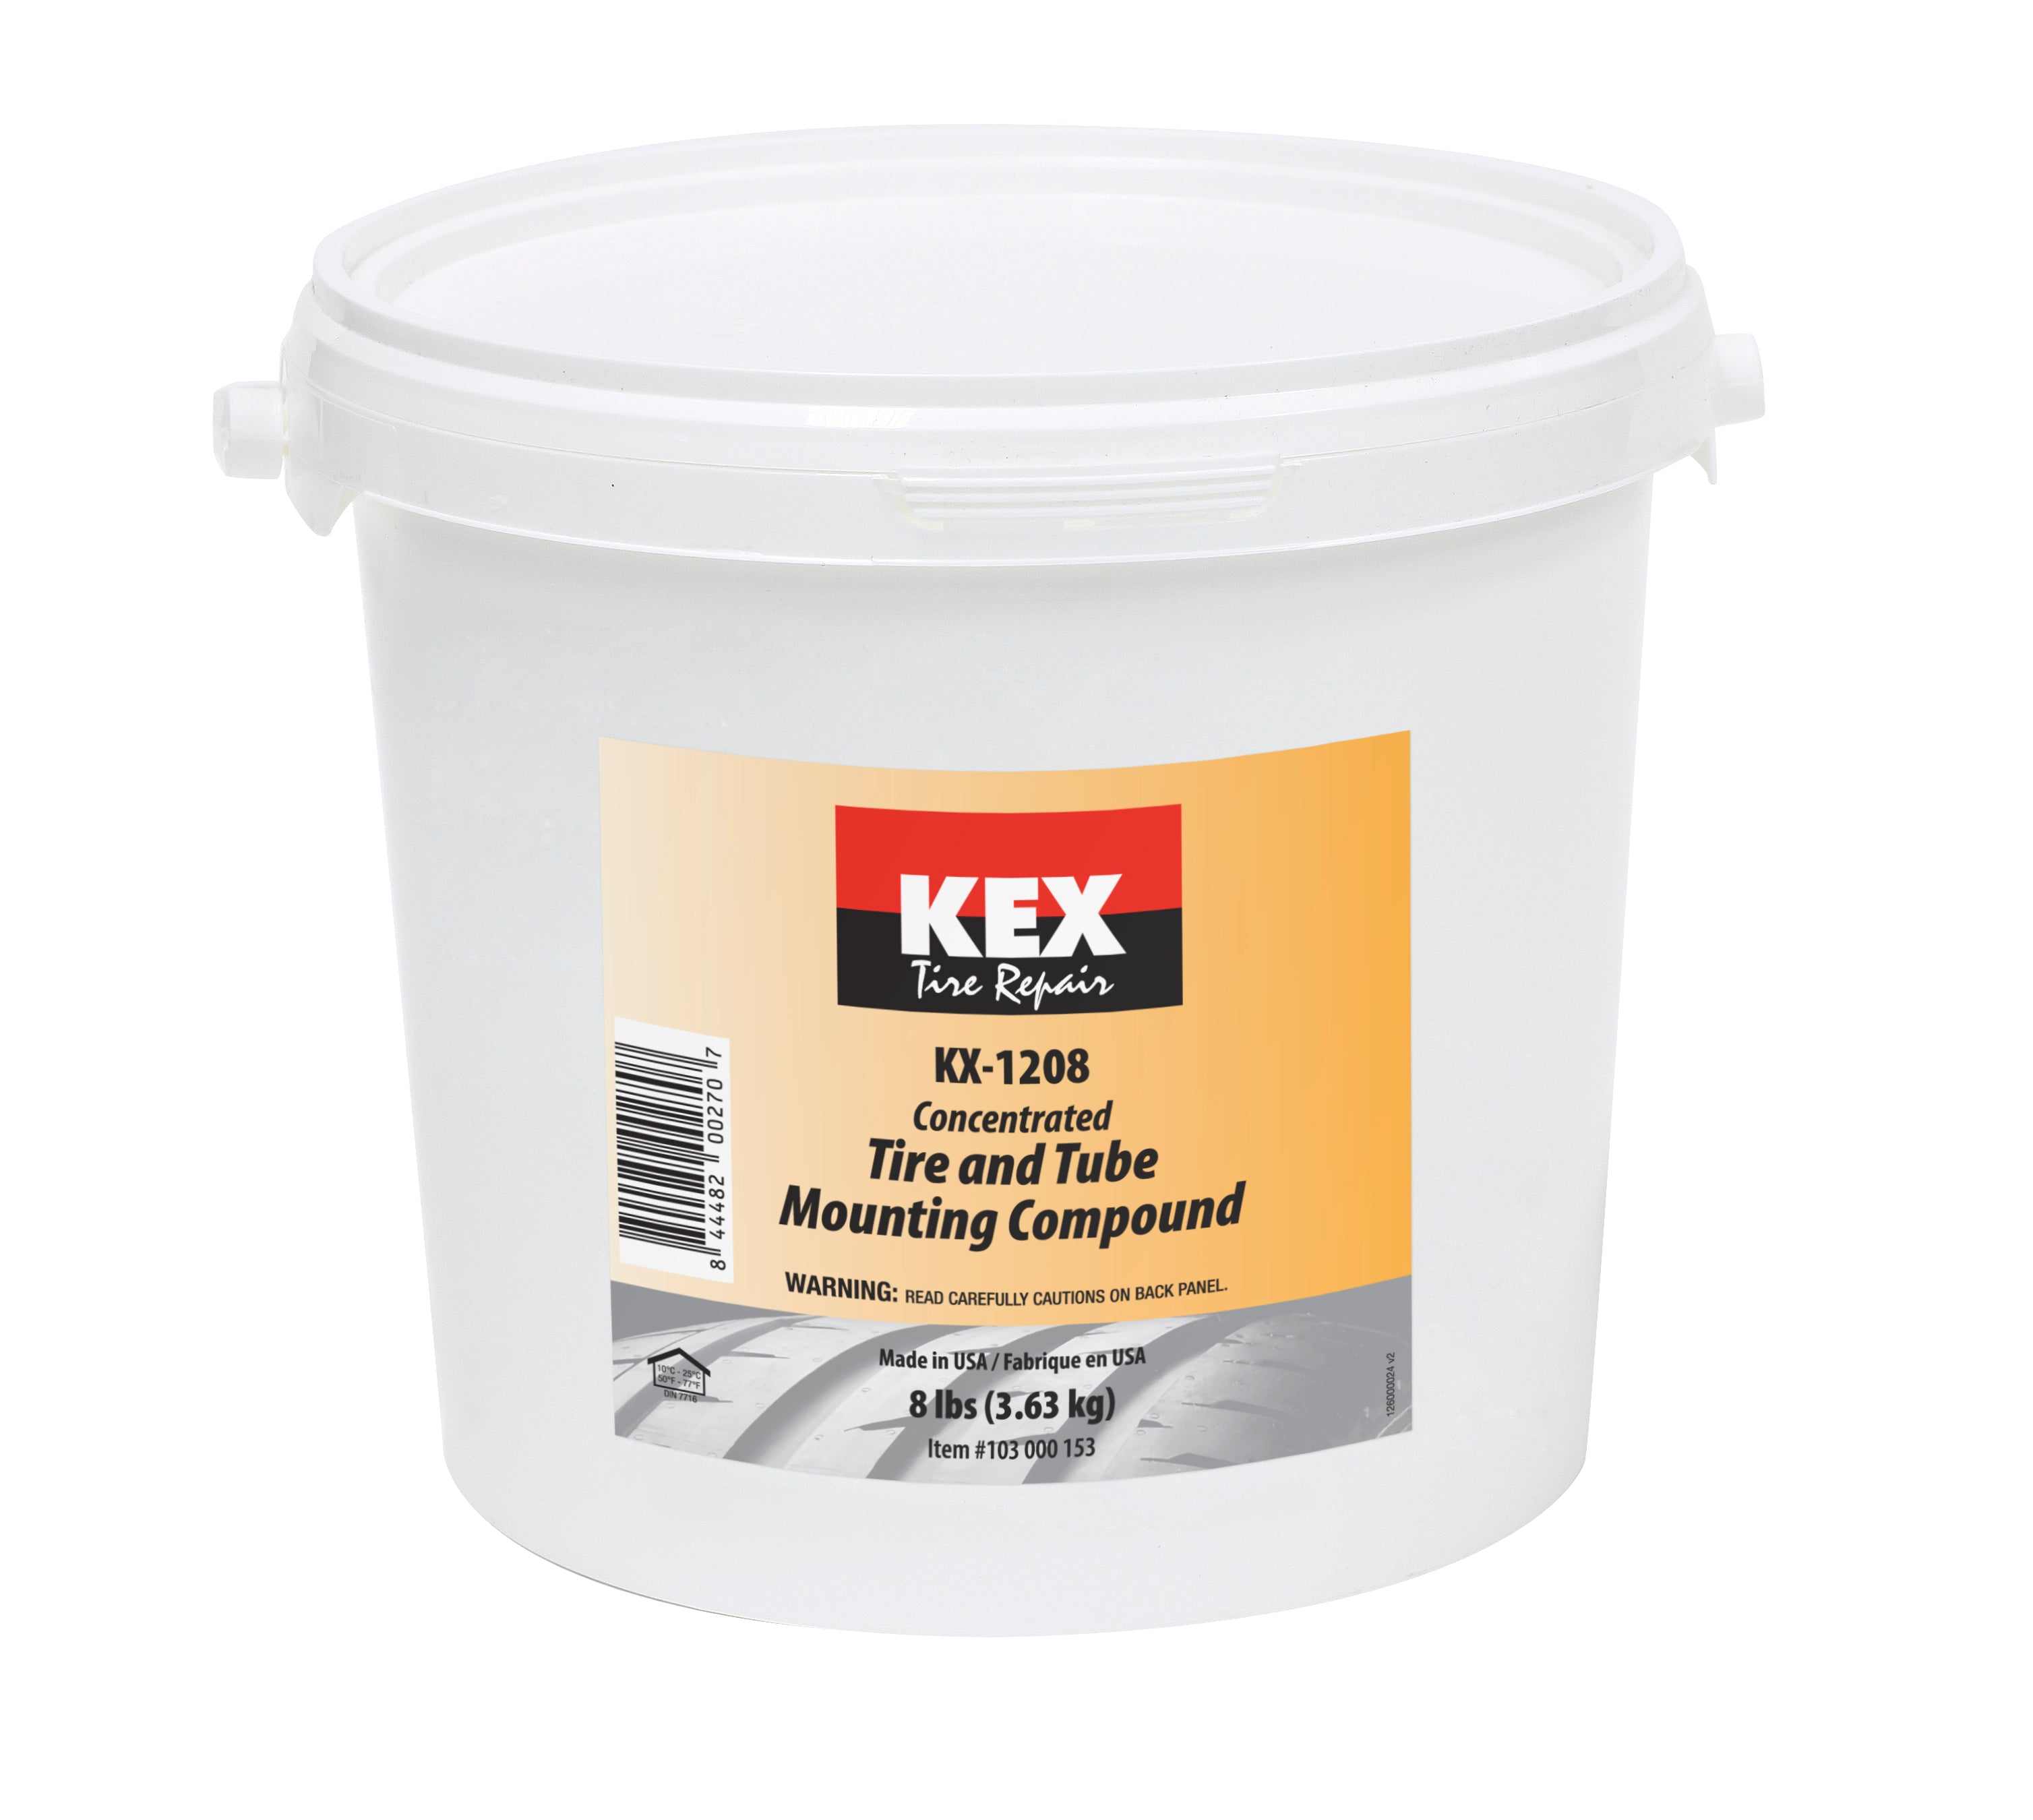 Kex 1208 Tire and Tube Mounting Compound - Brown - 8 lb